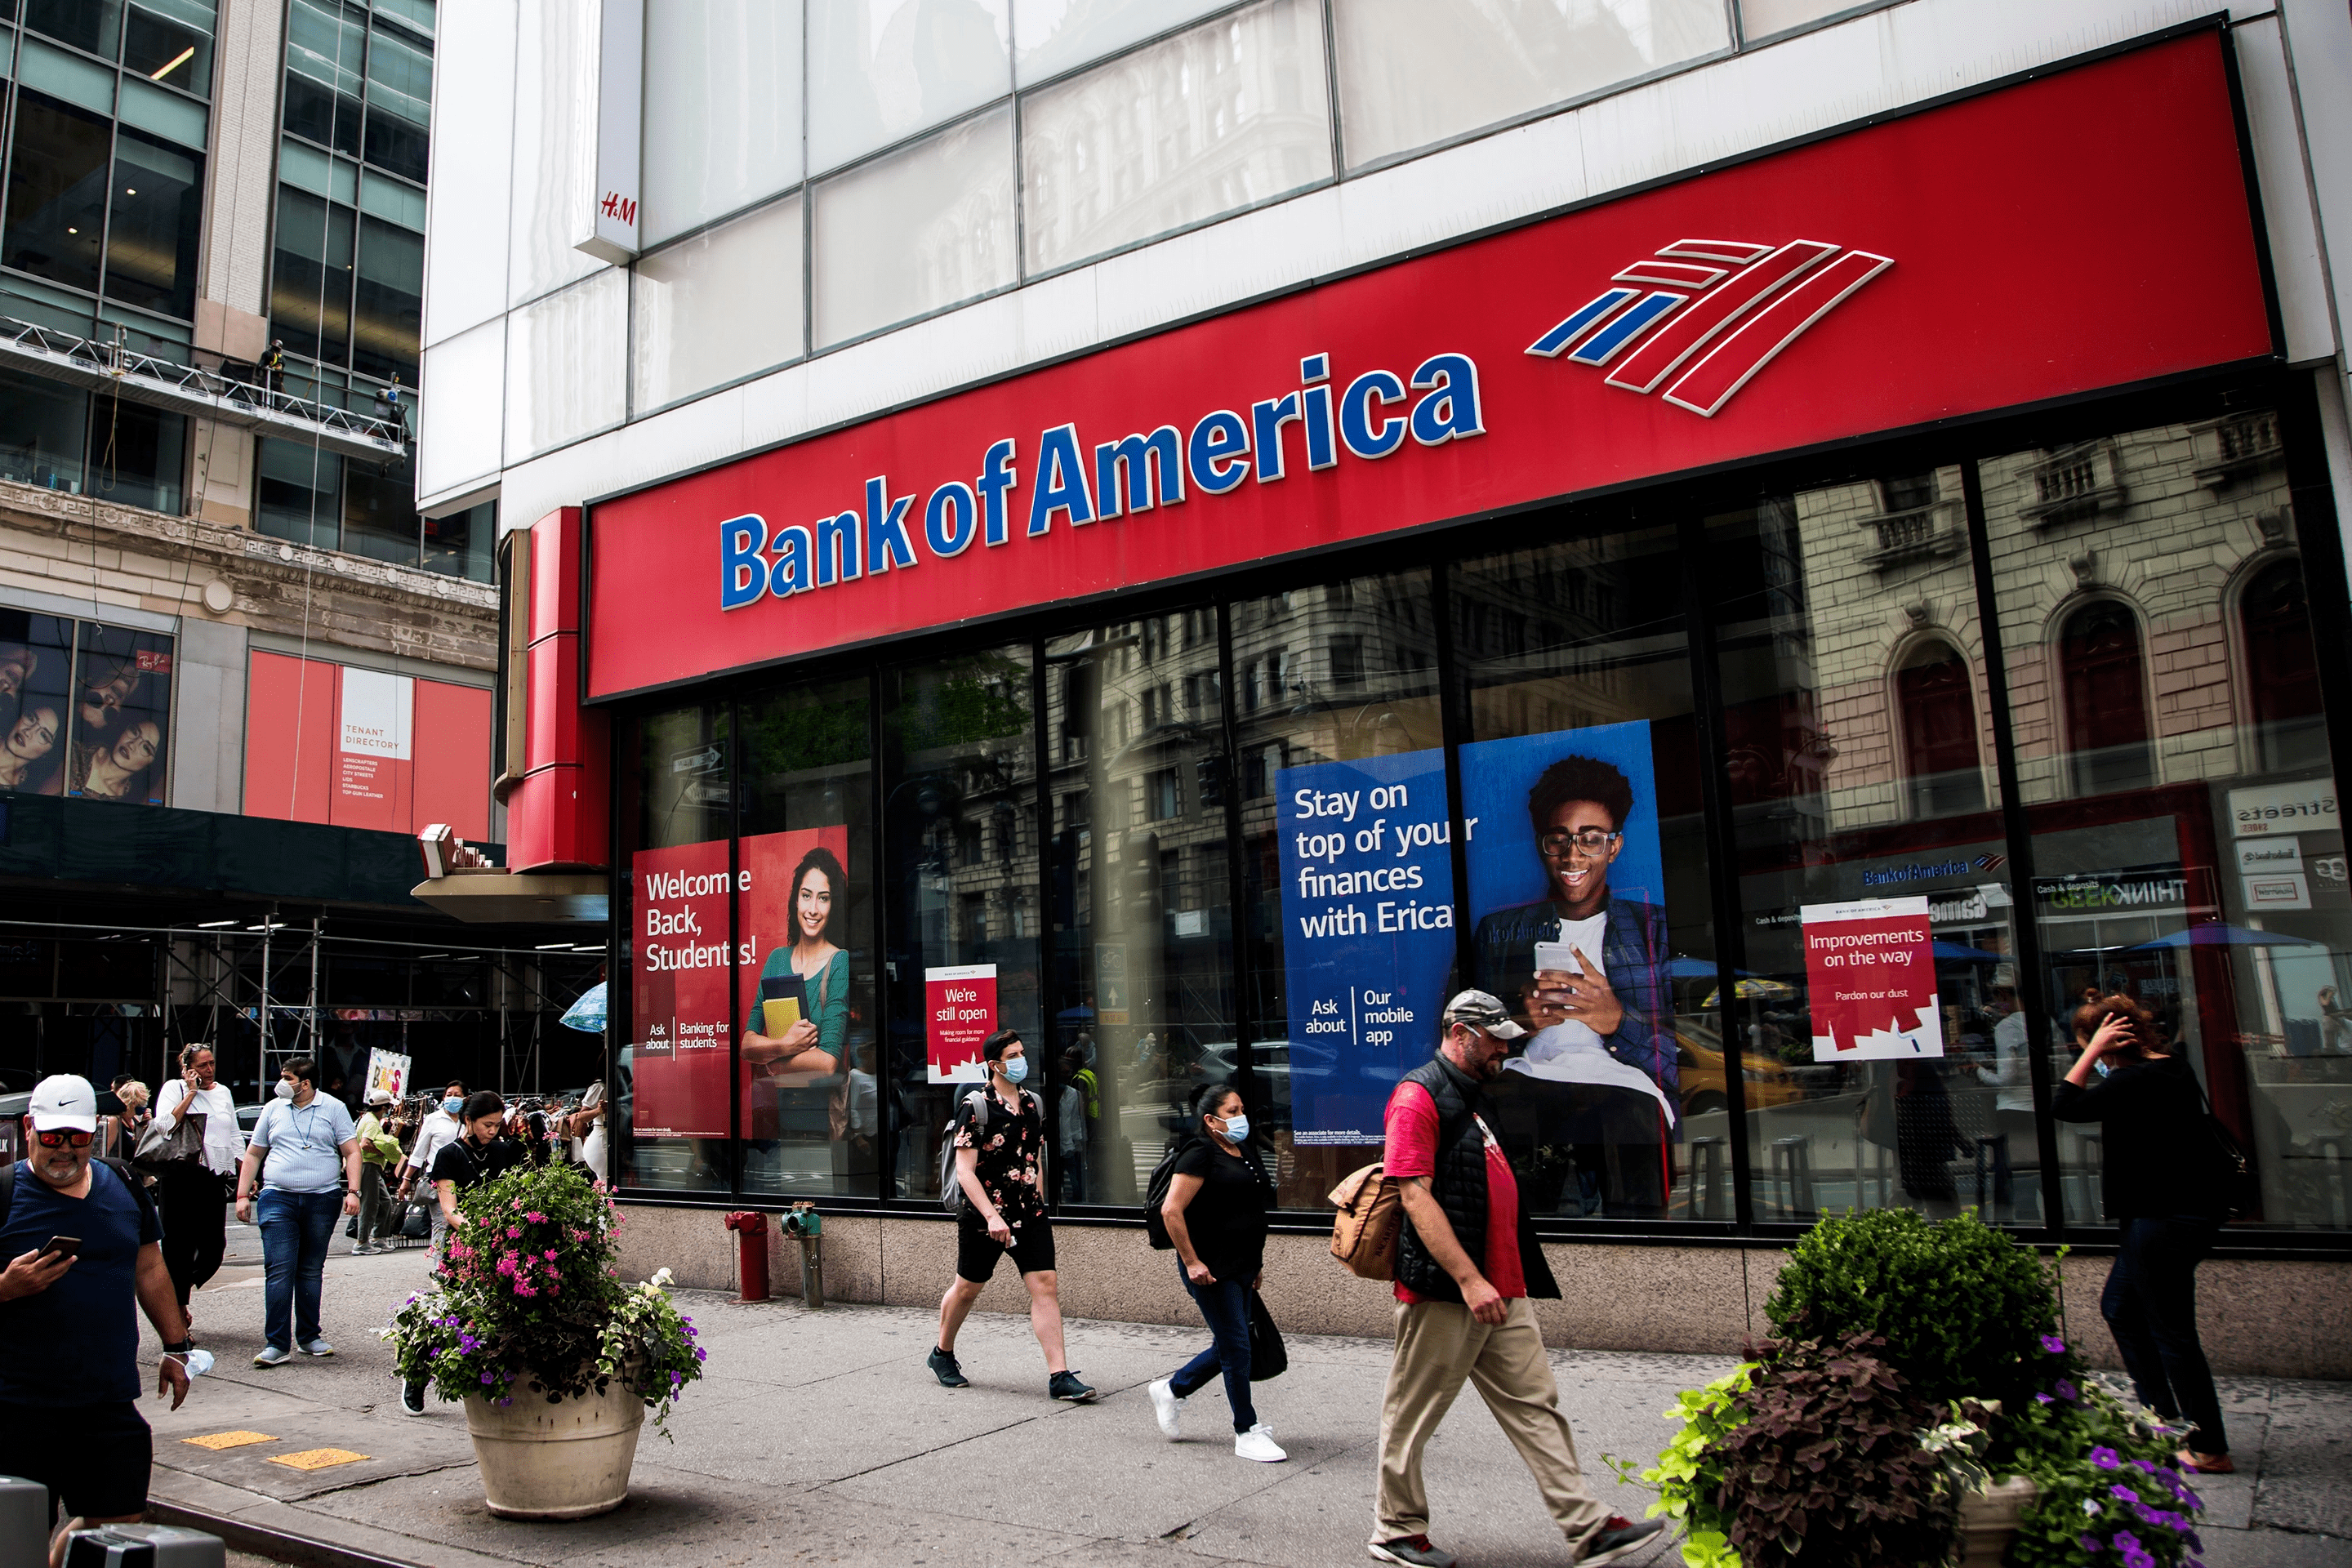 Bank of America doesn't have a plan "go deep" in crypto due to regulatory issues